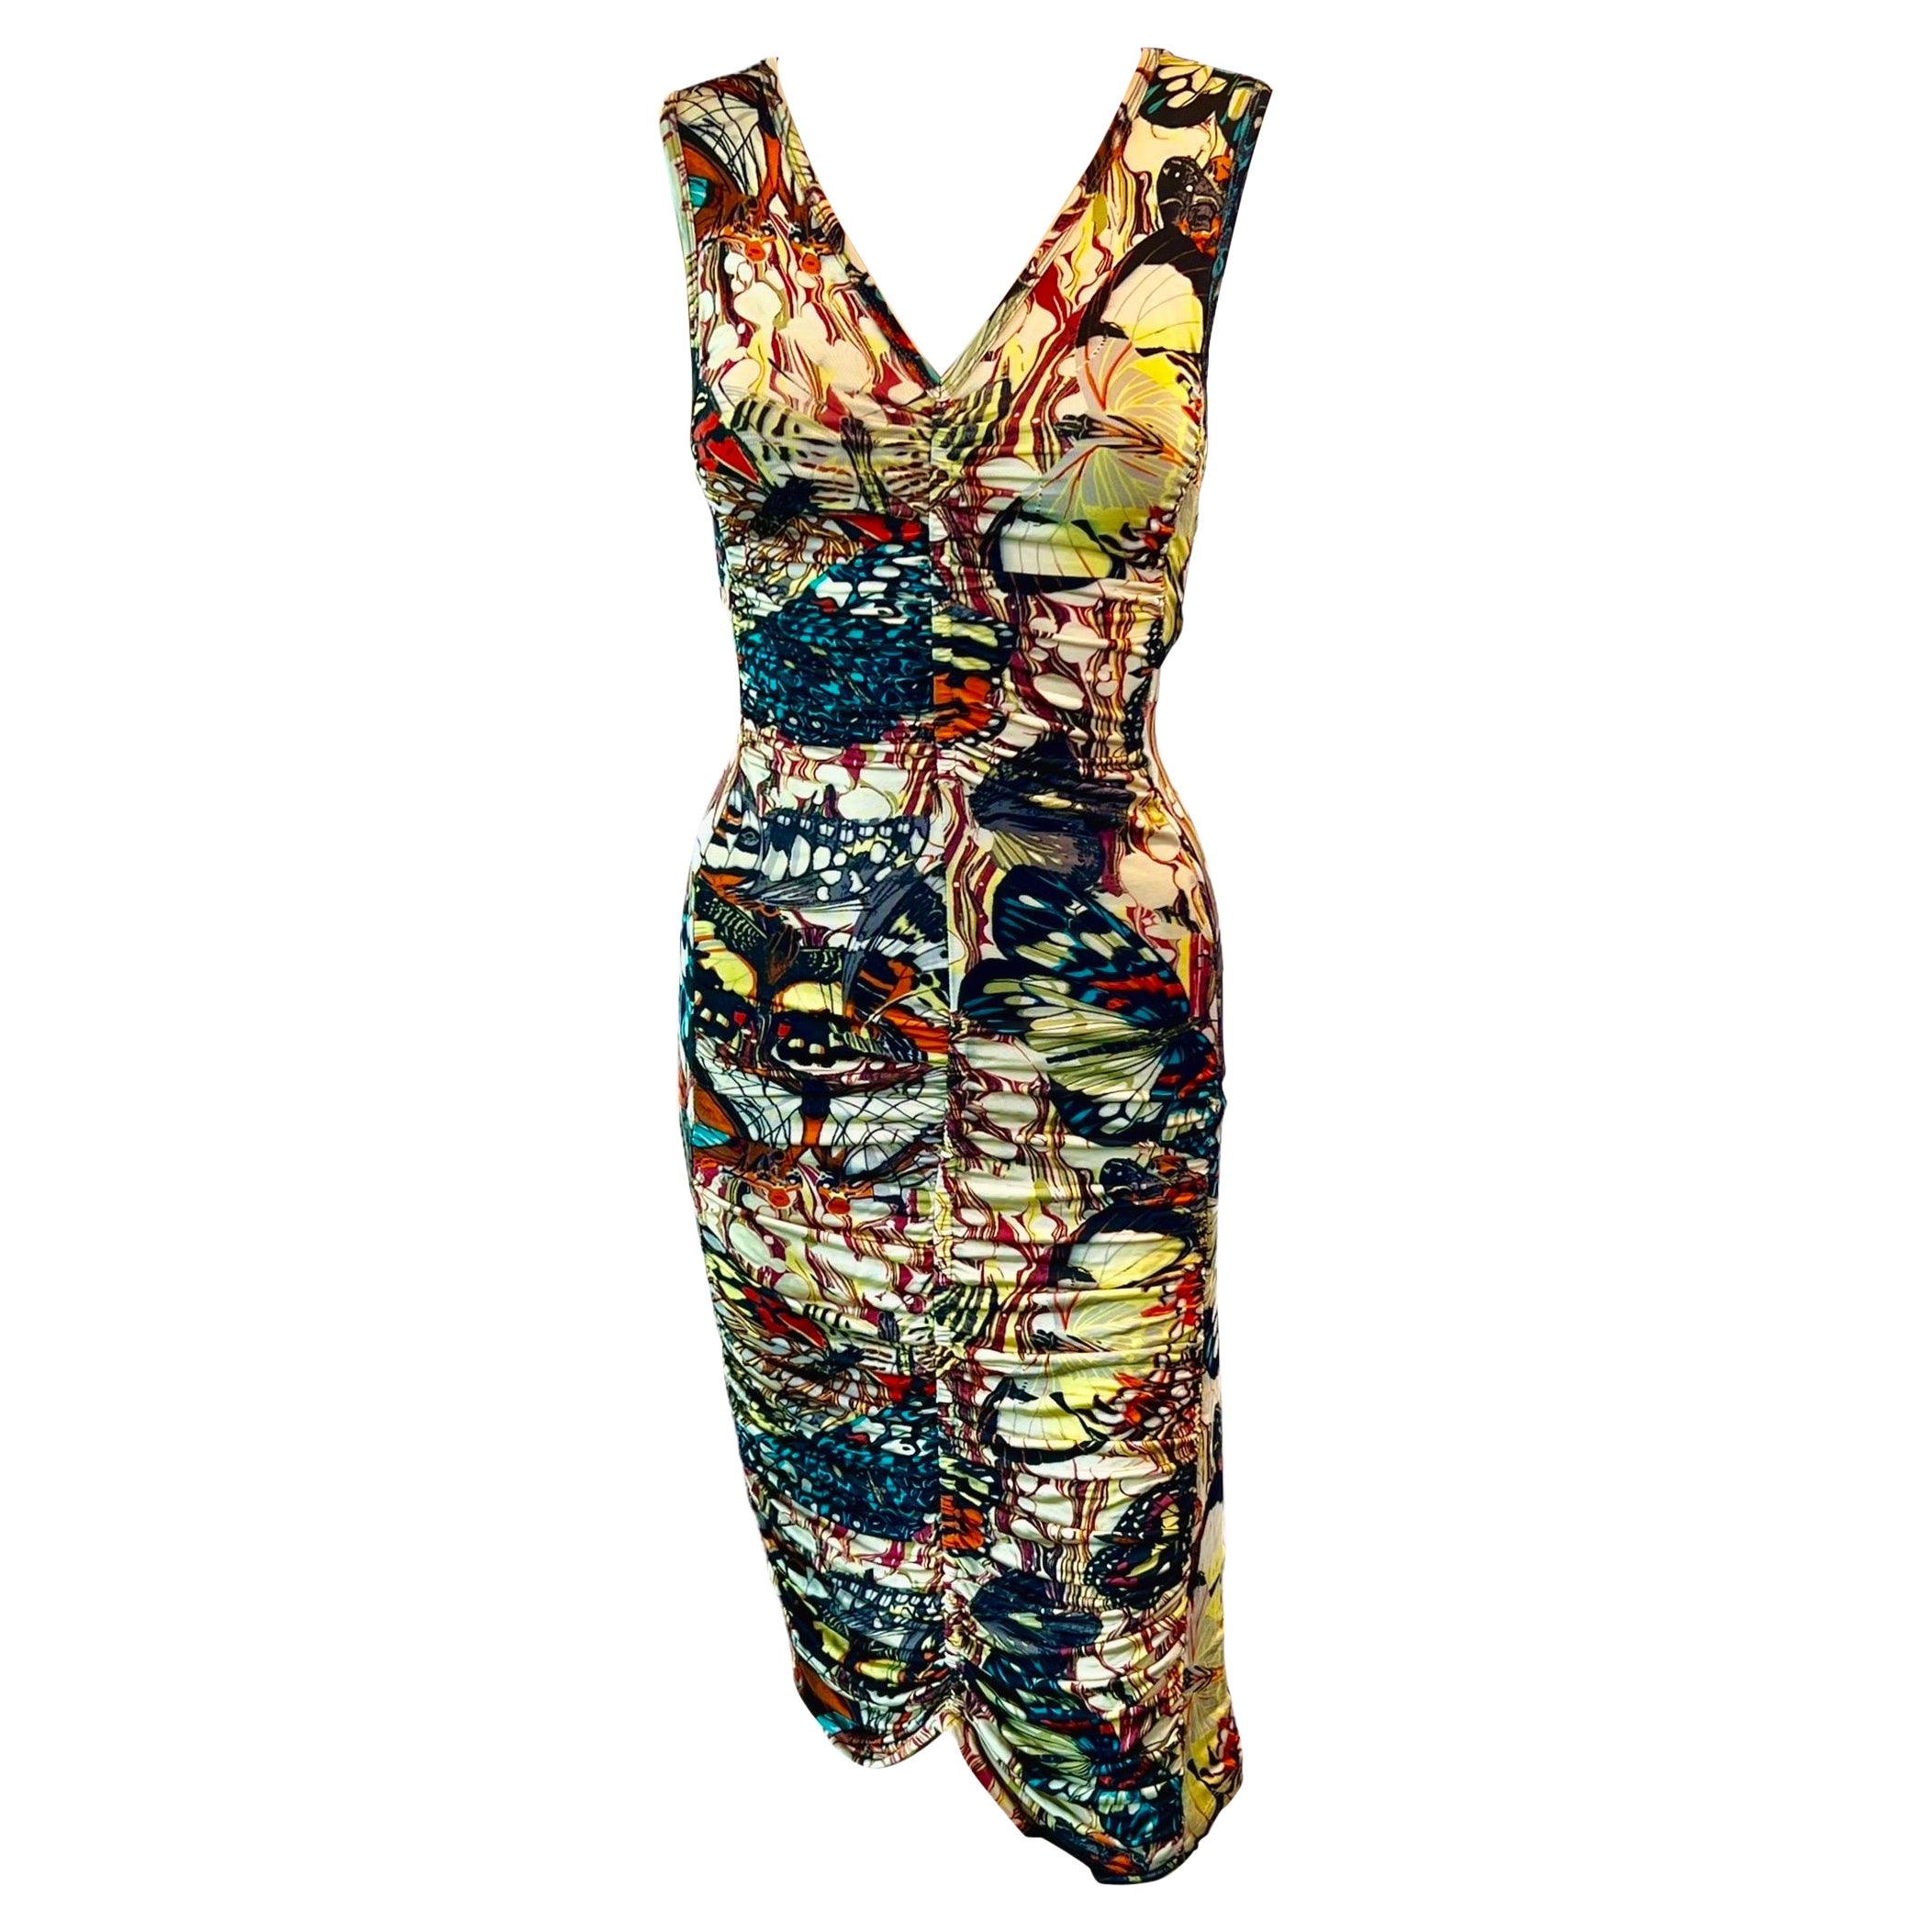 Jean Paul Gaultier Soleil S/S 2003 Butterfly Print Ruched Bodycon Mini Dress